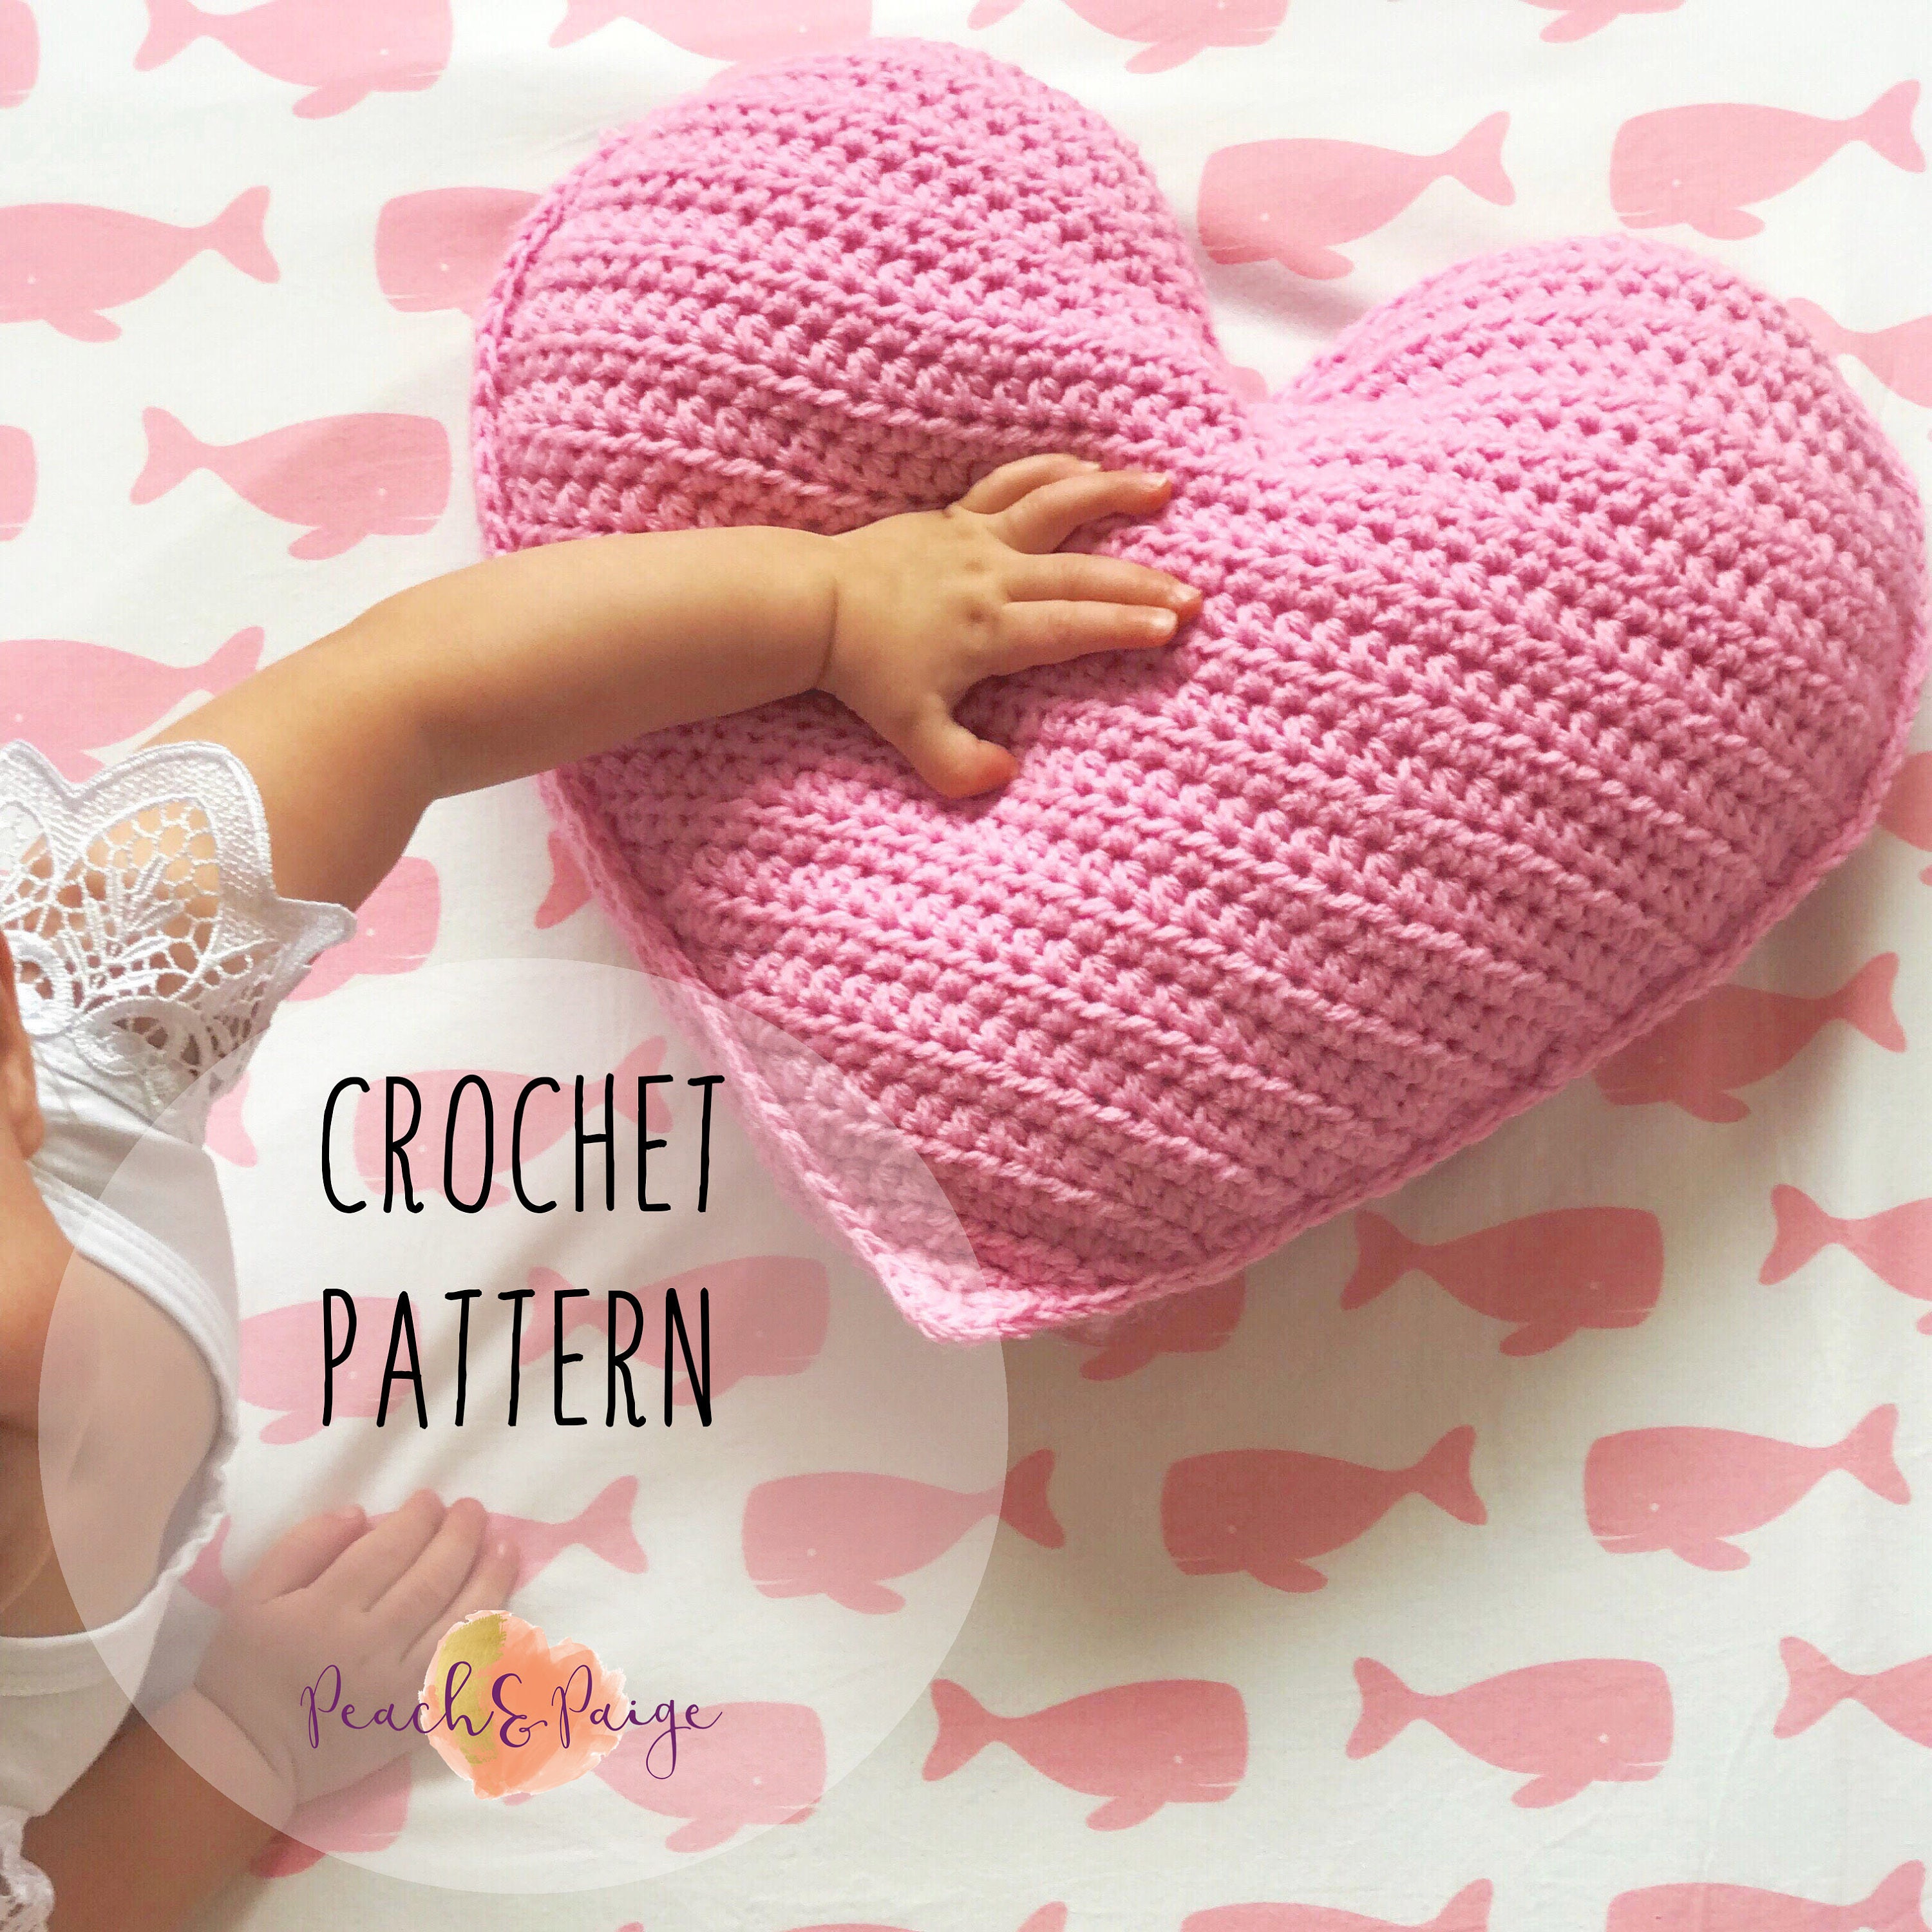 Crochet Pillow, Support A Hooker Donate Yarn, Crochet Gift, Crocheting  Gifts, Gift For Crochet, Crochet Gift For Her, CRO264F12